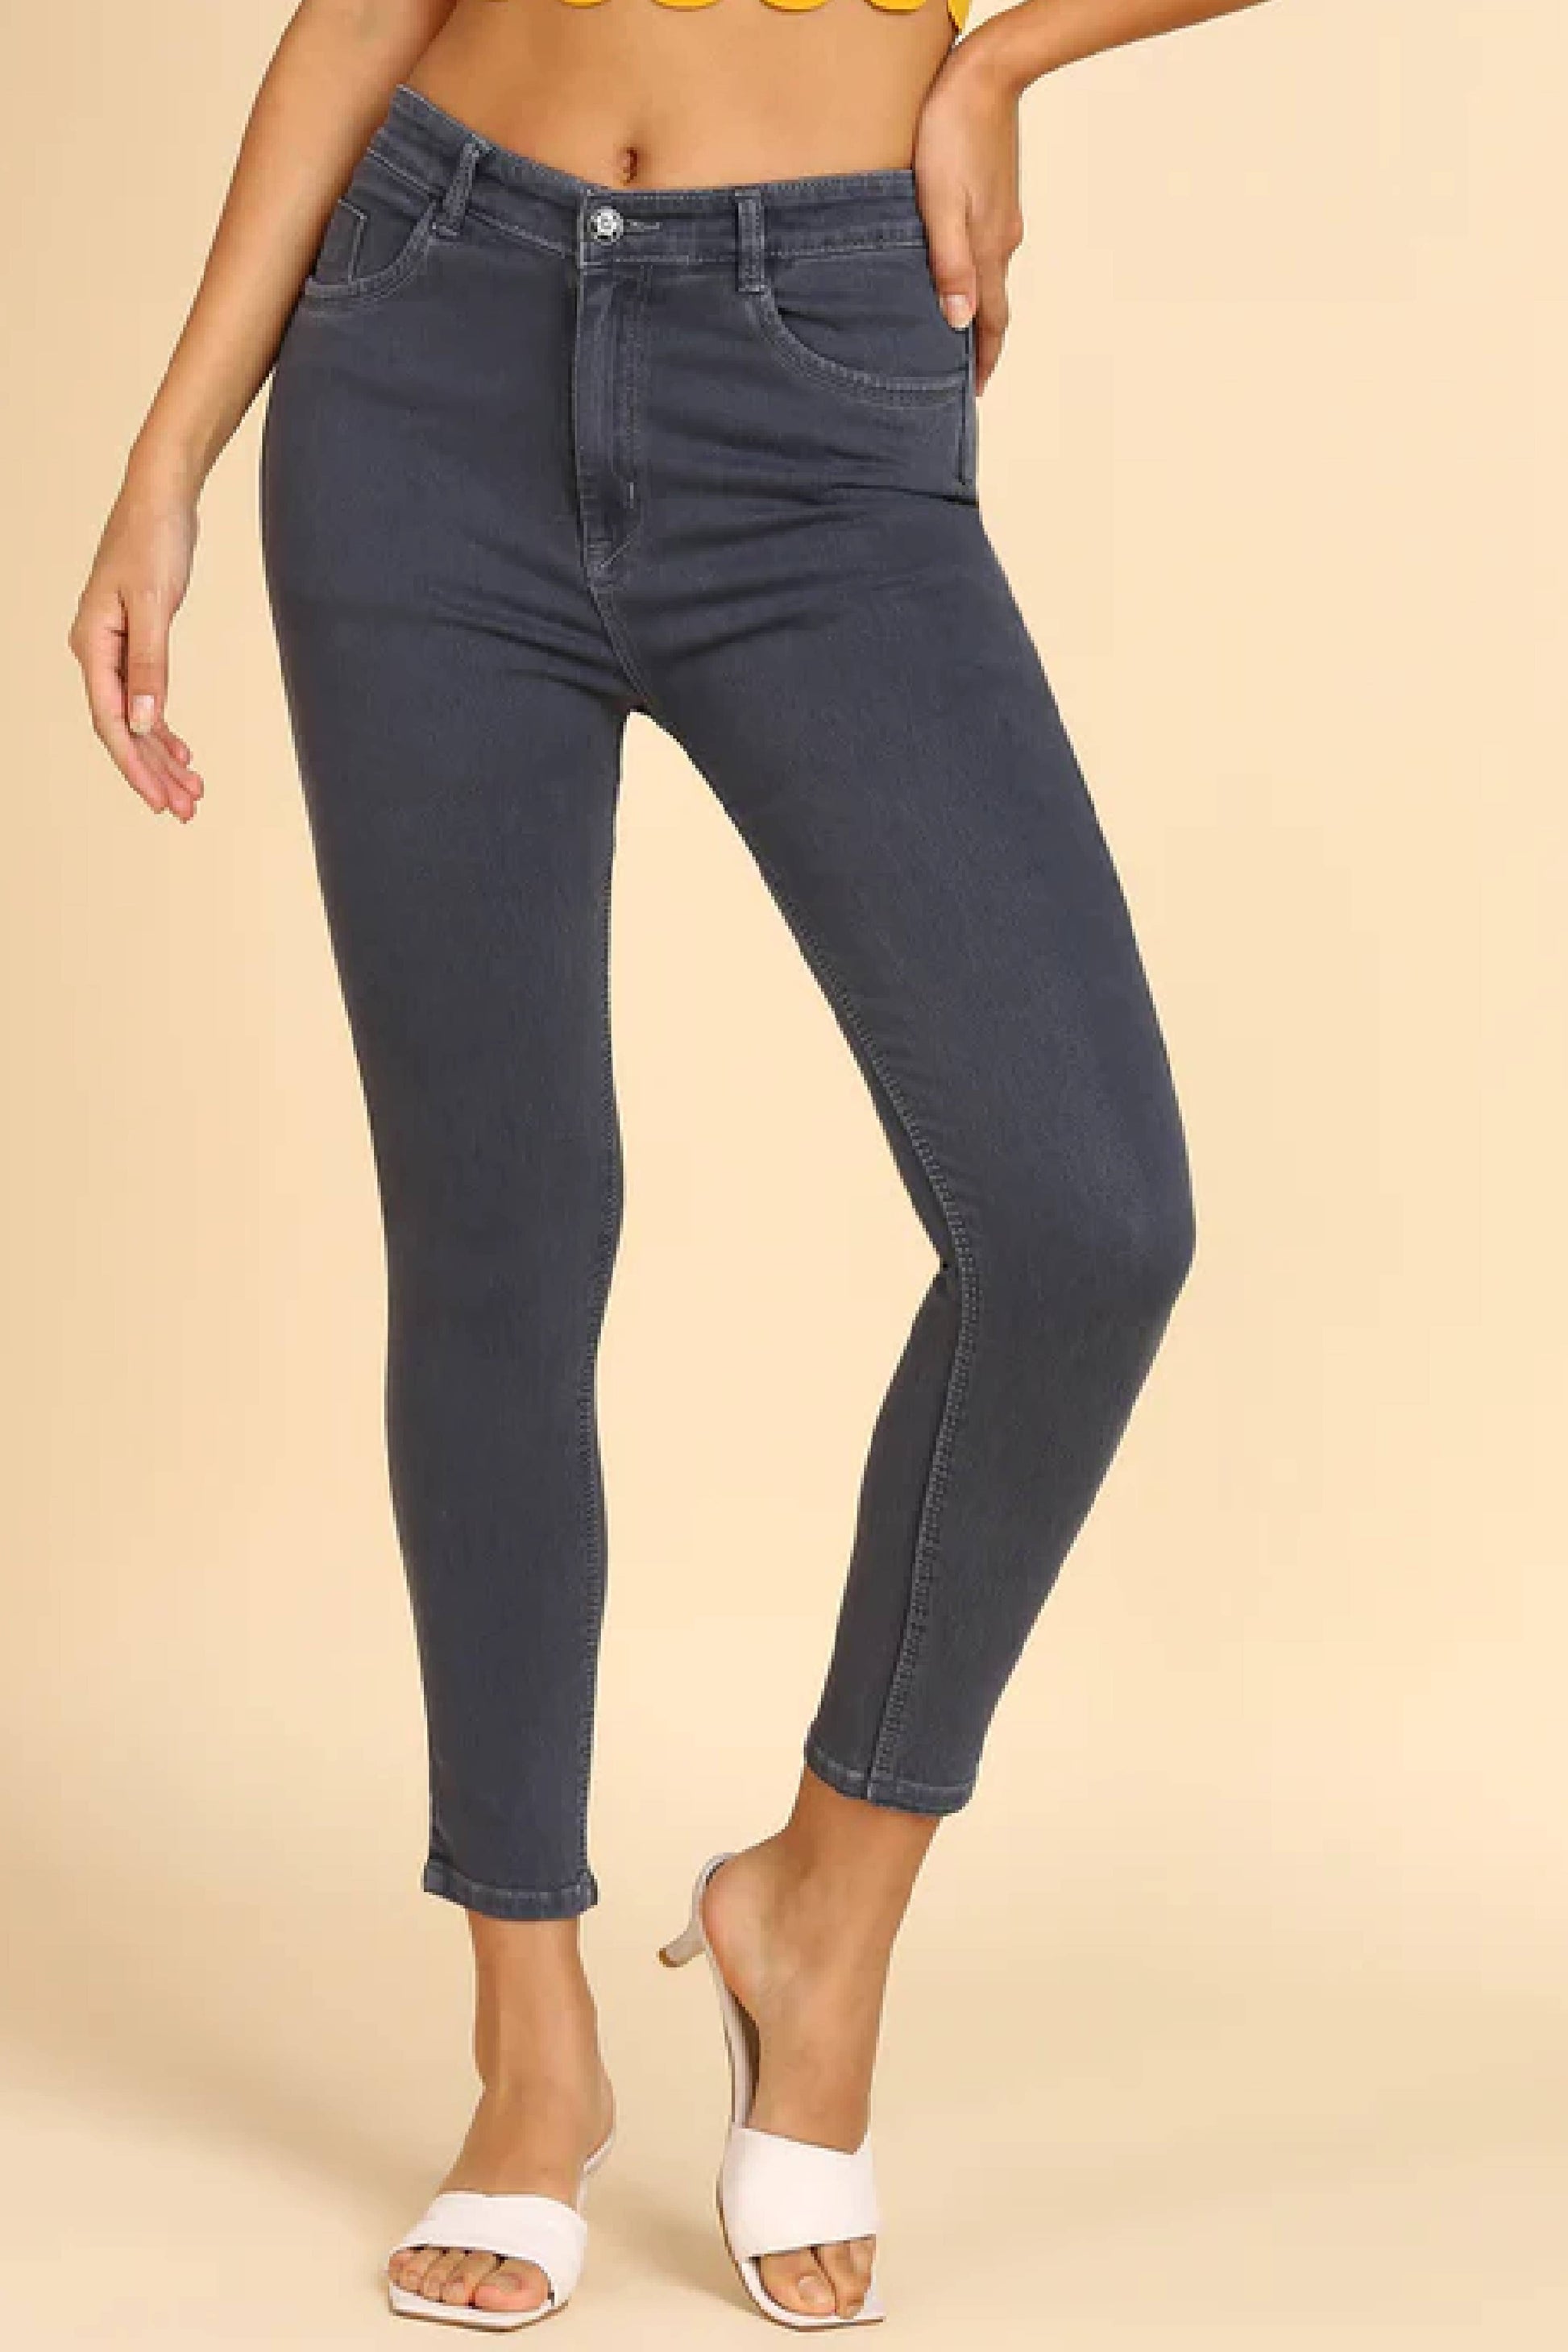 Grey colour slim fit jeans for womens